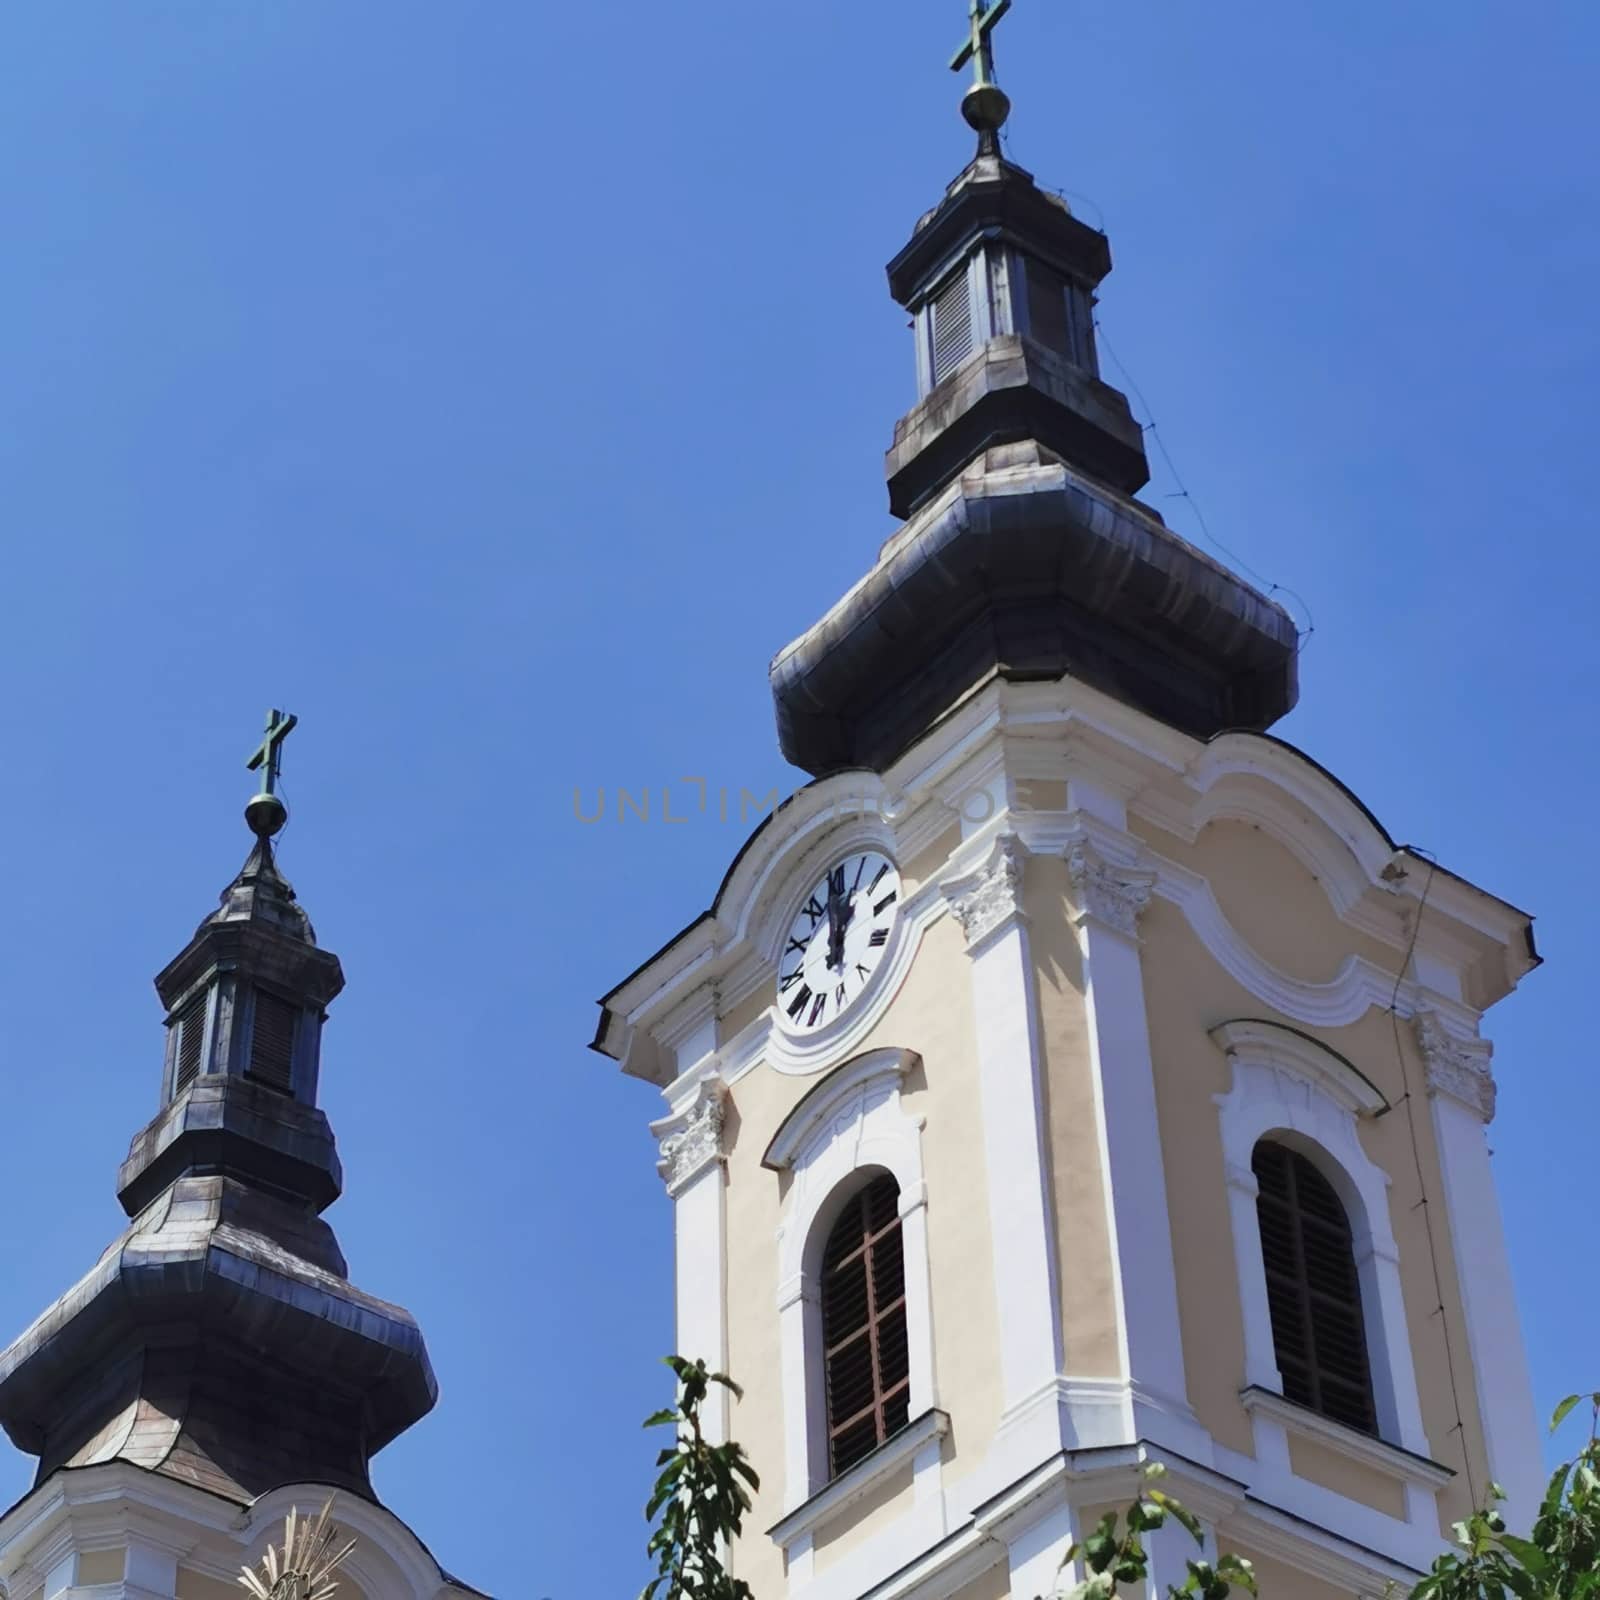 The church in Miskolc is close up with the beautiful large number plate clock. High quality photo